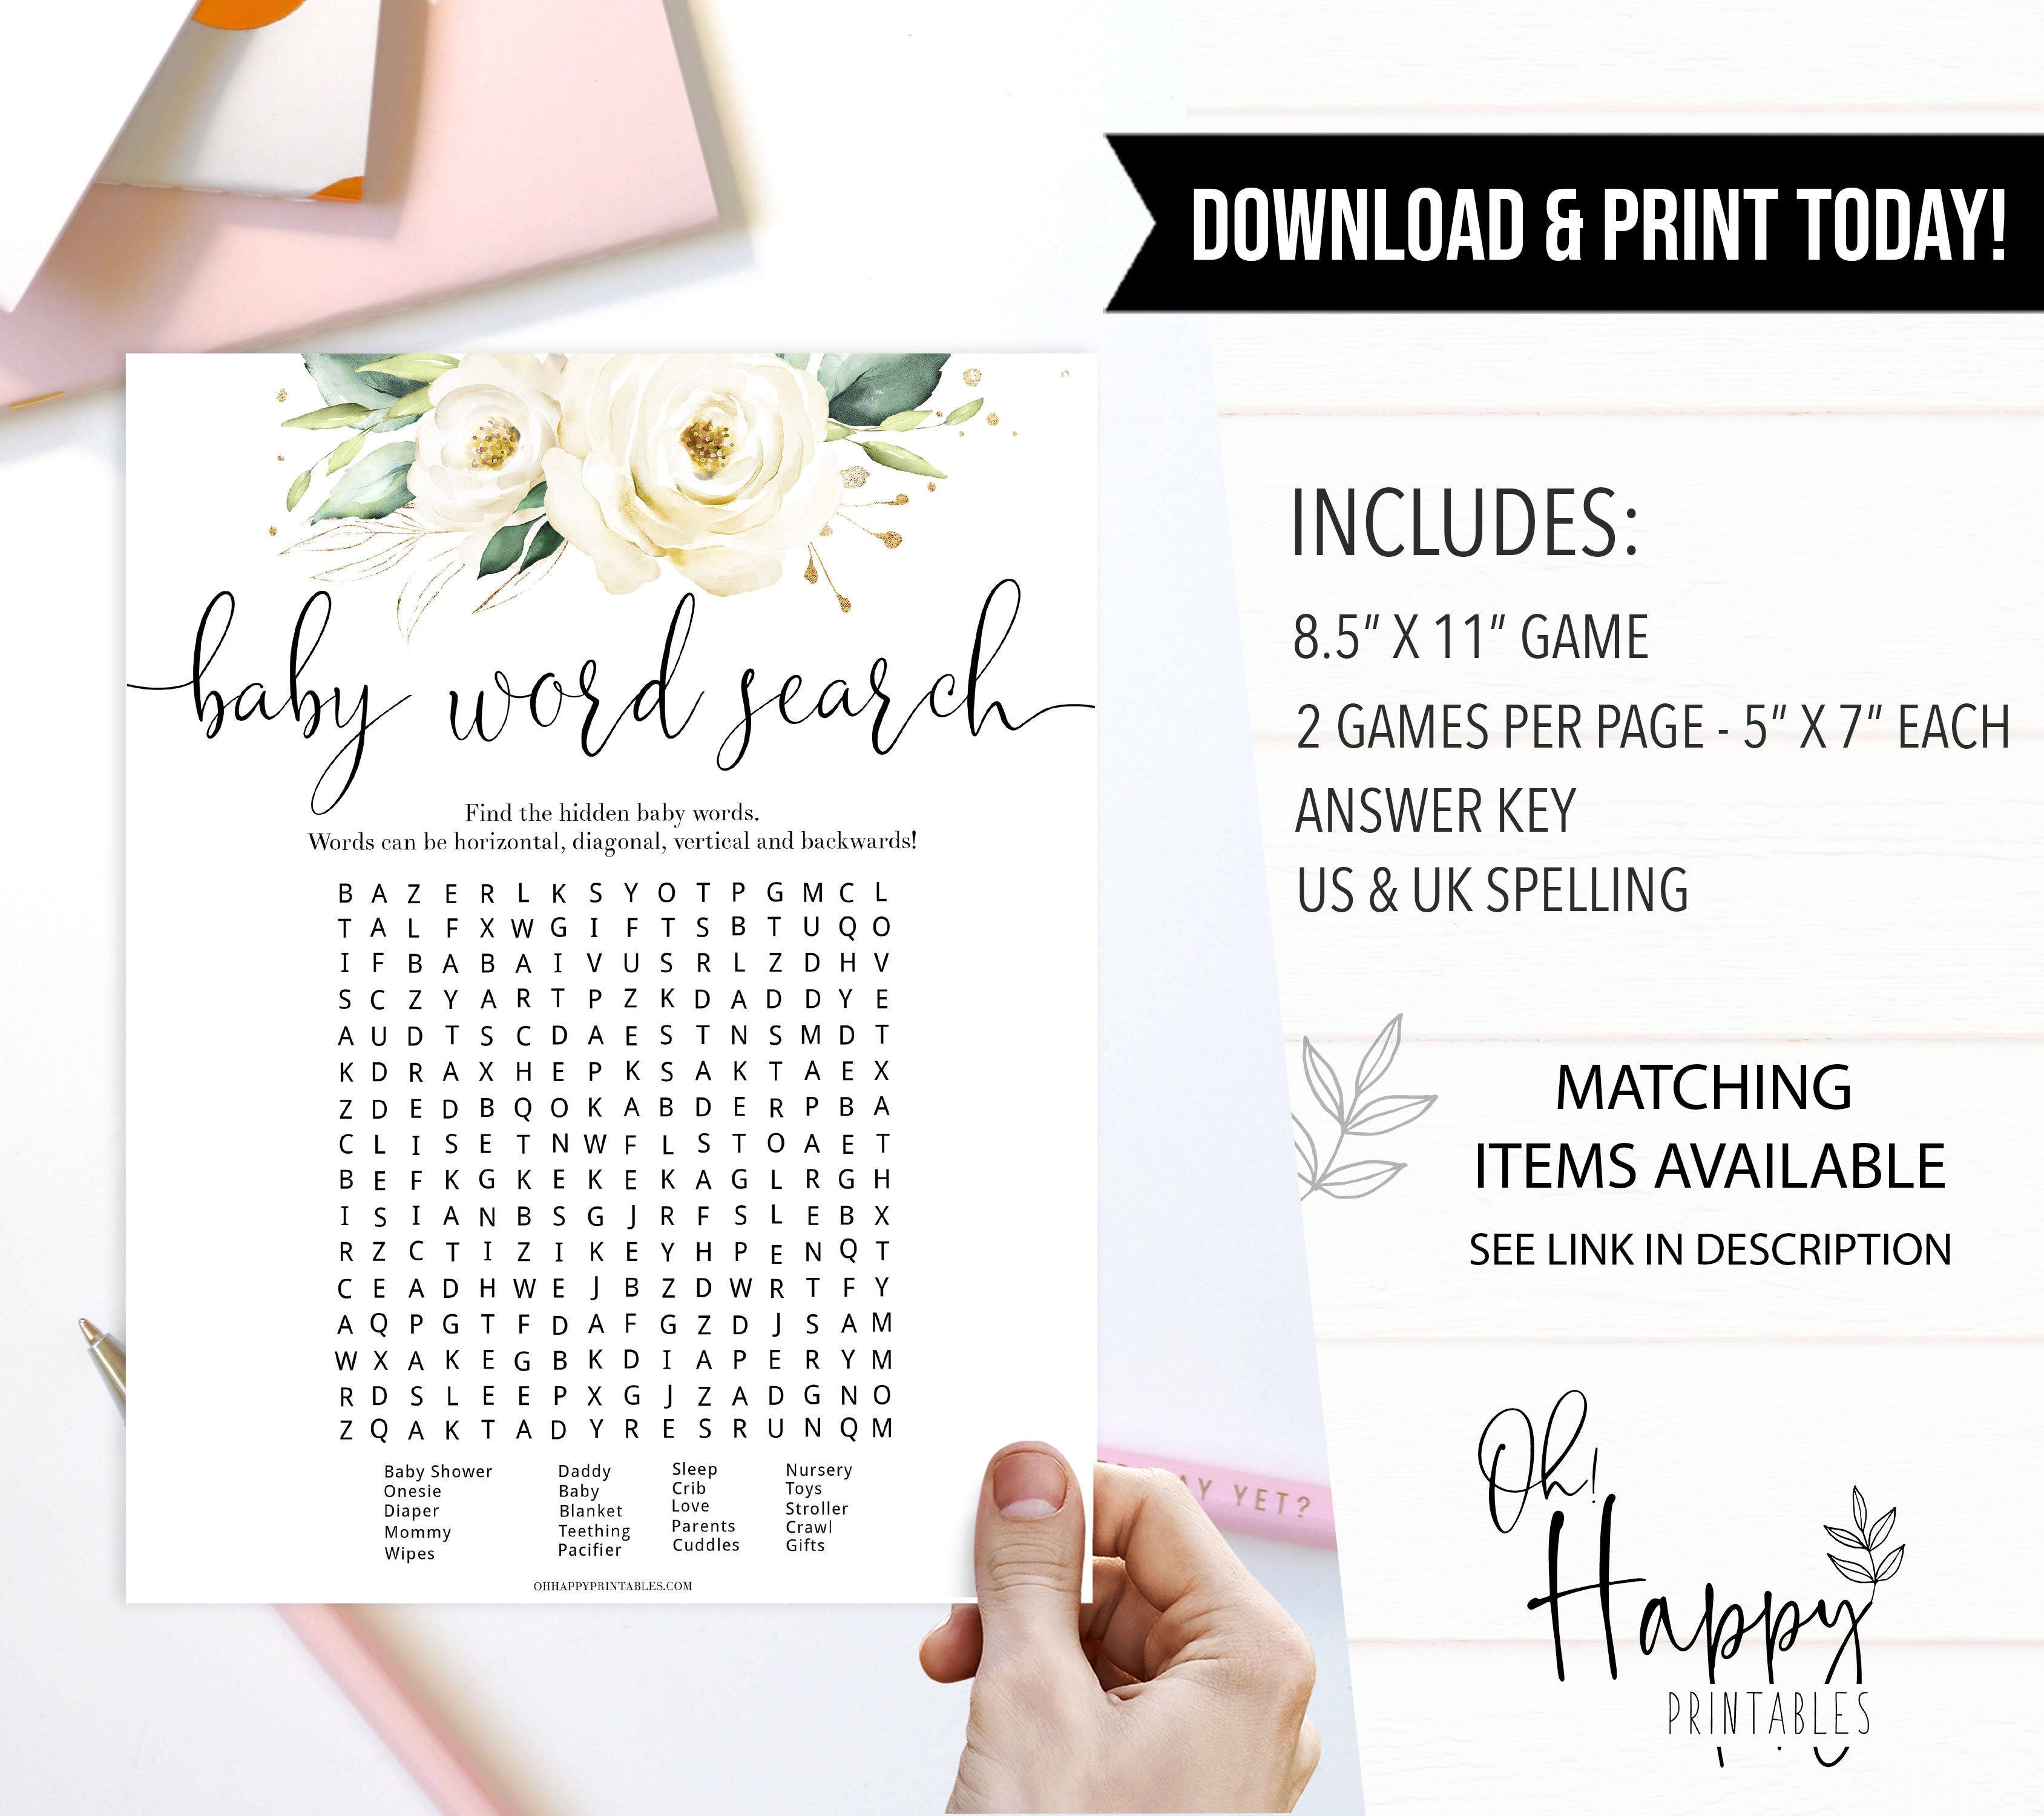 baby shower word search, baby word search game, Printable baby shower games, shite floral baby games, baby shower games, fun baby shower ideas, top baby shower ideas, floral baby shower, baby shower games, fun floral baby shower ideas